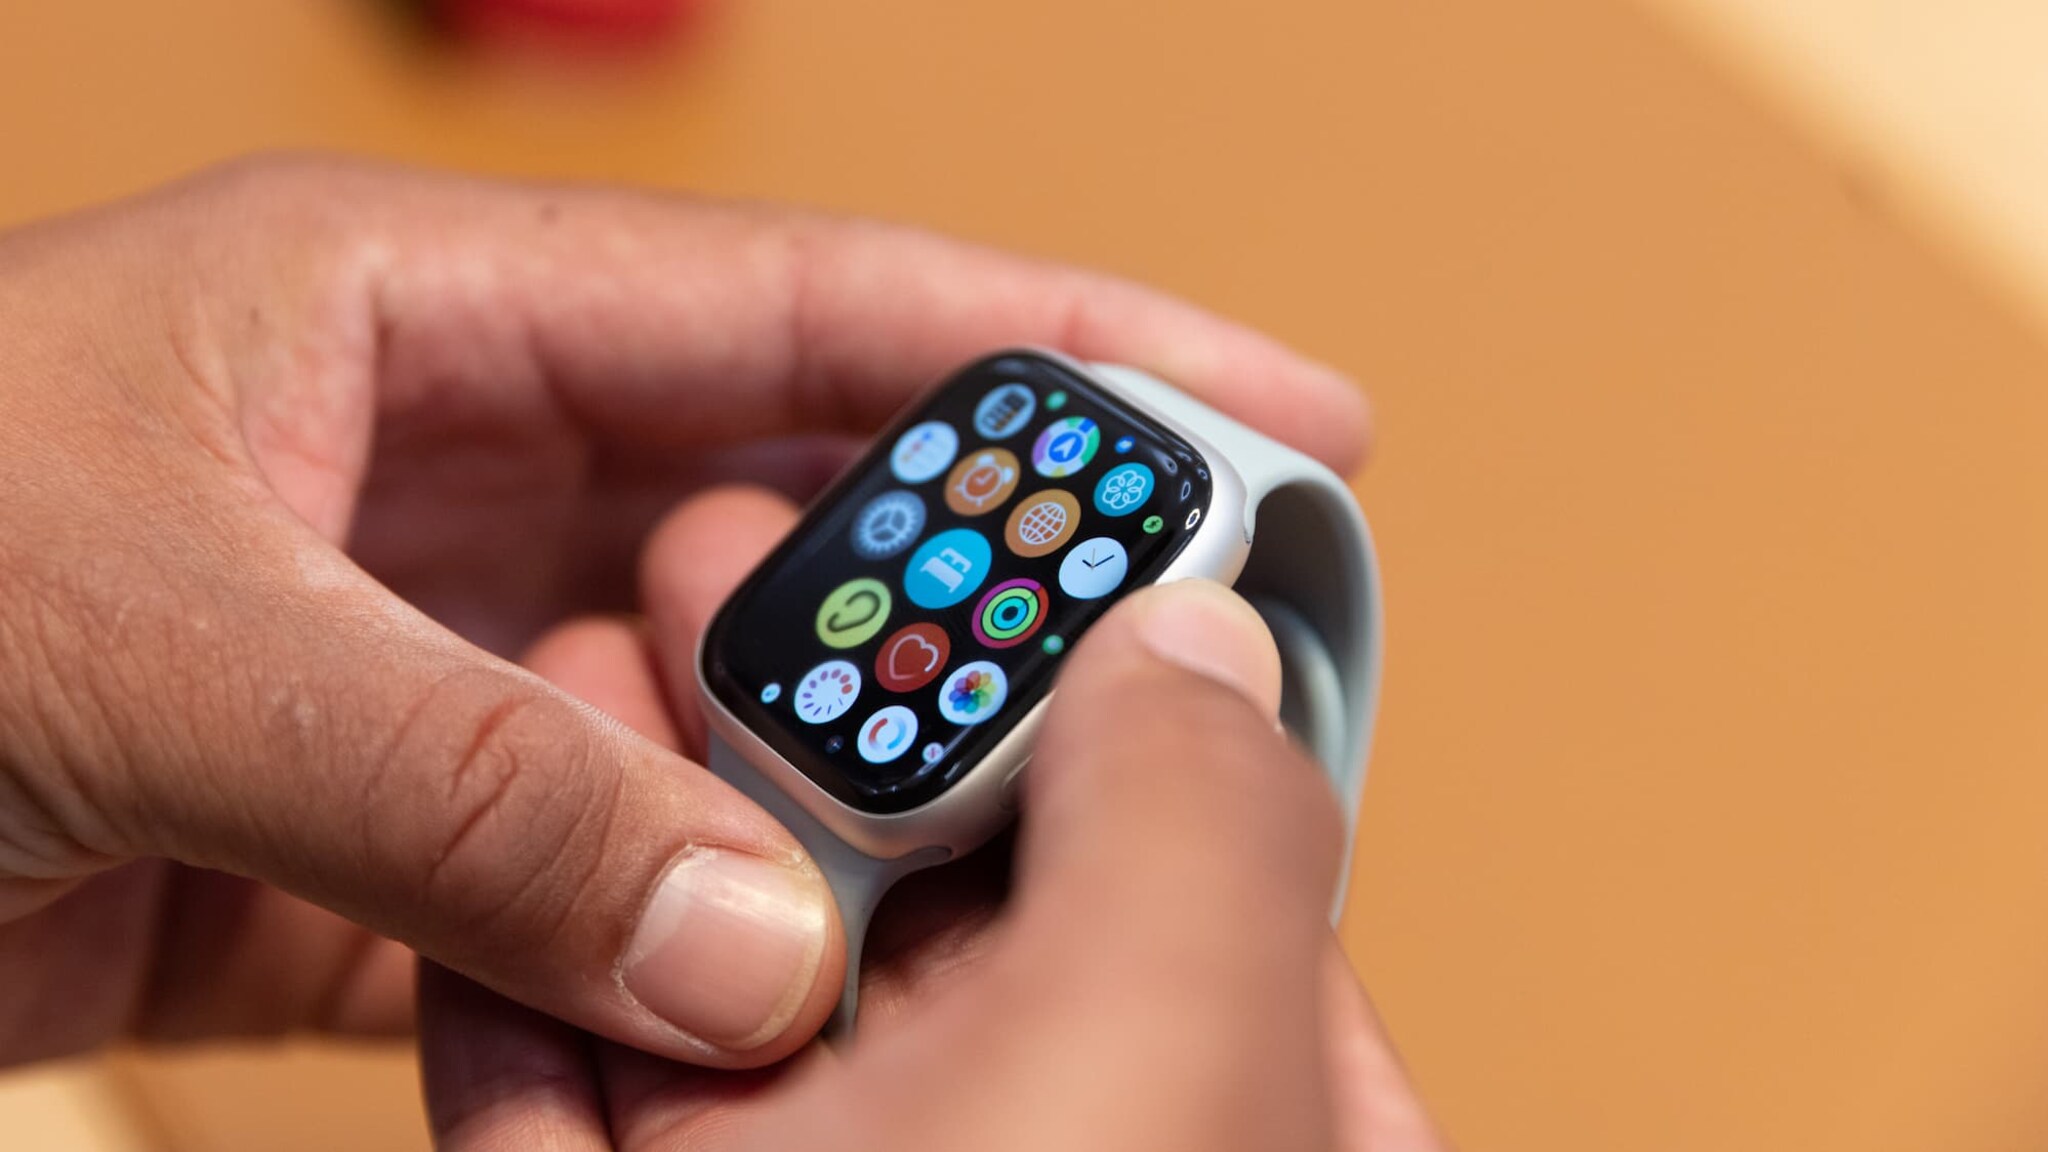 Apple sues: 'Apple Watch doesn't scale well with darker skin tones'